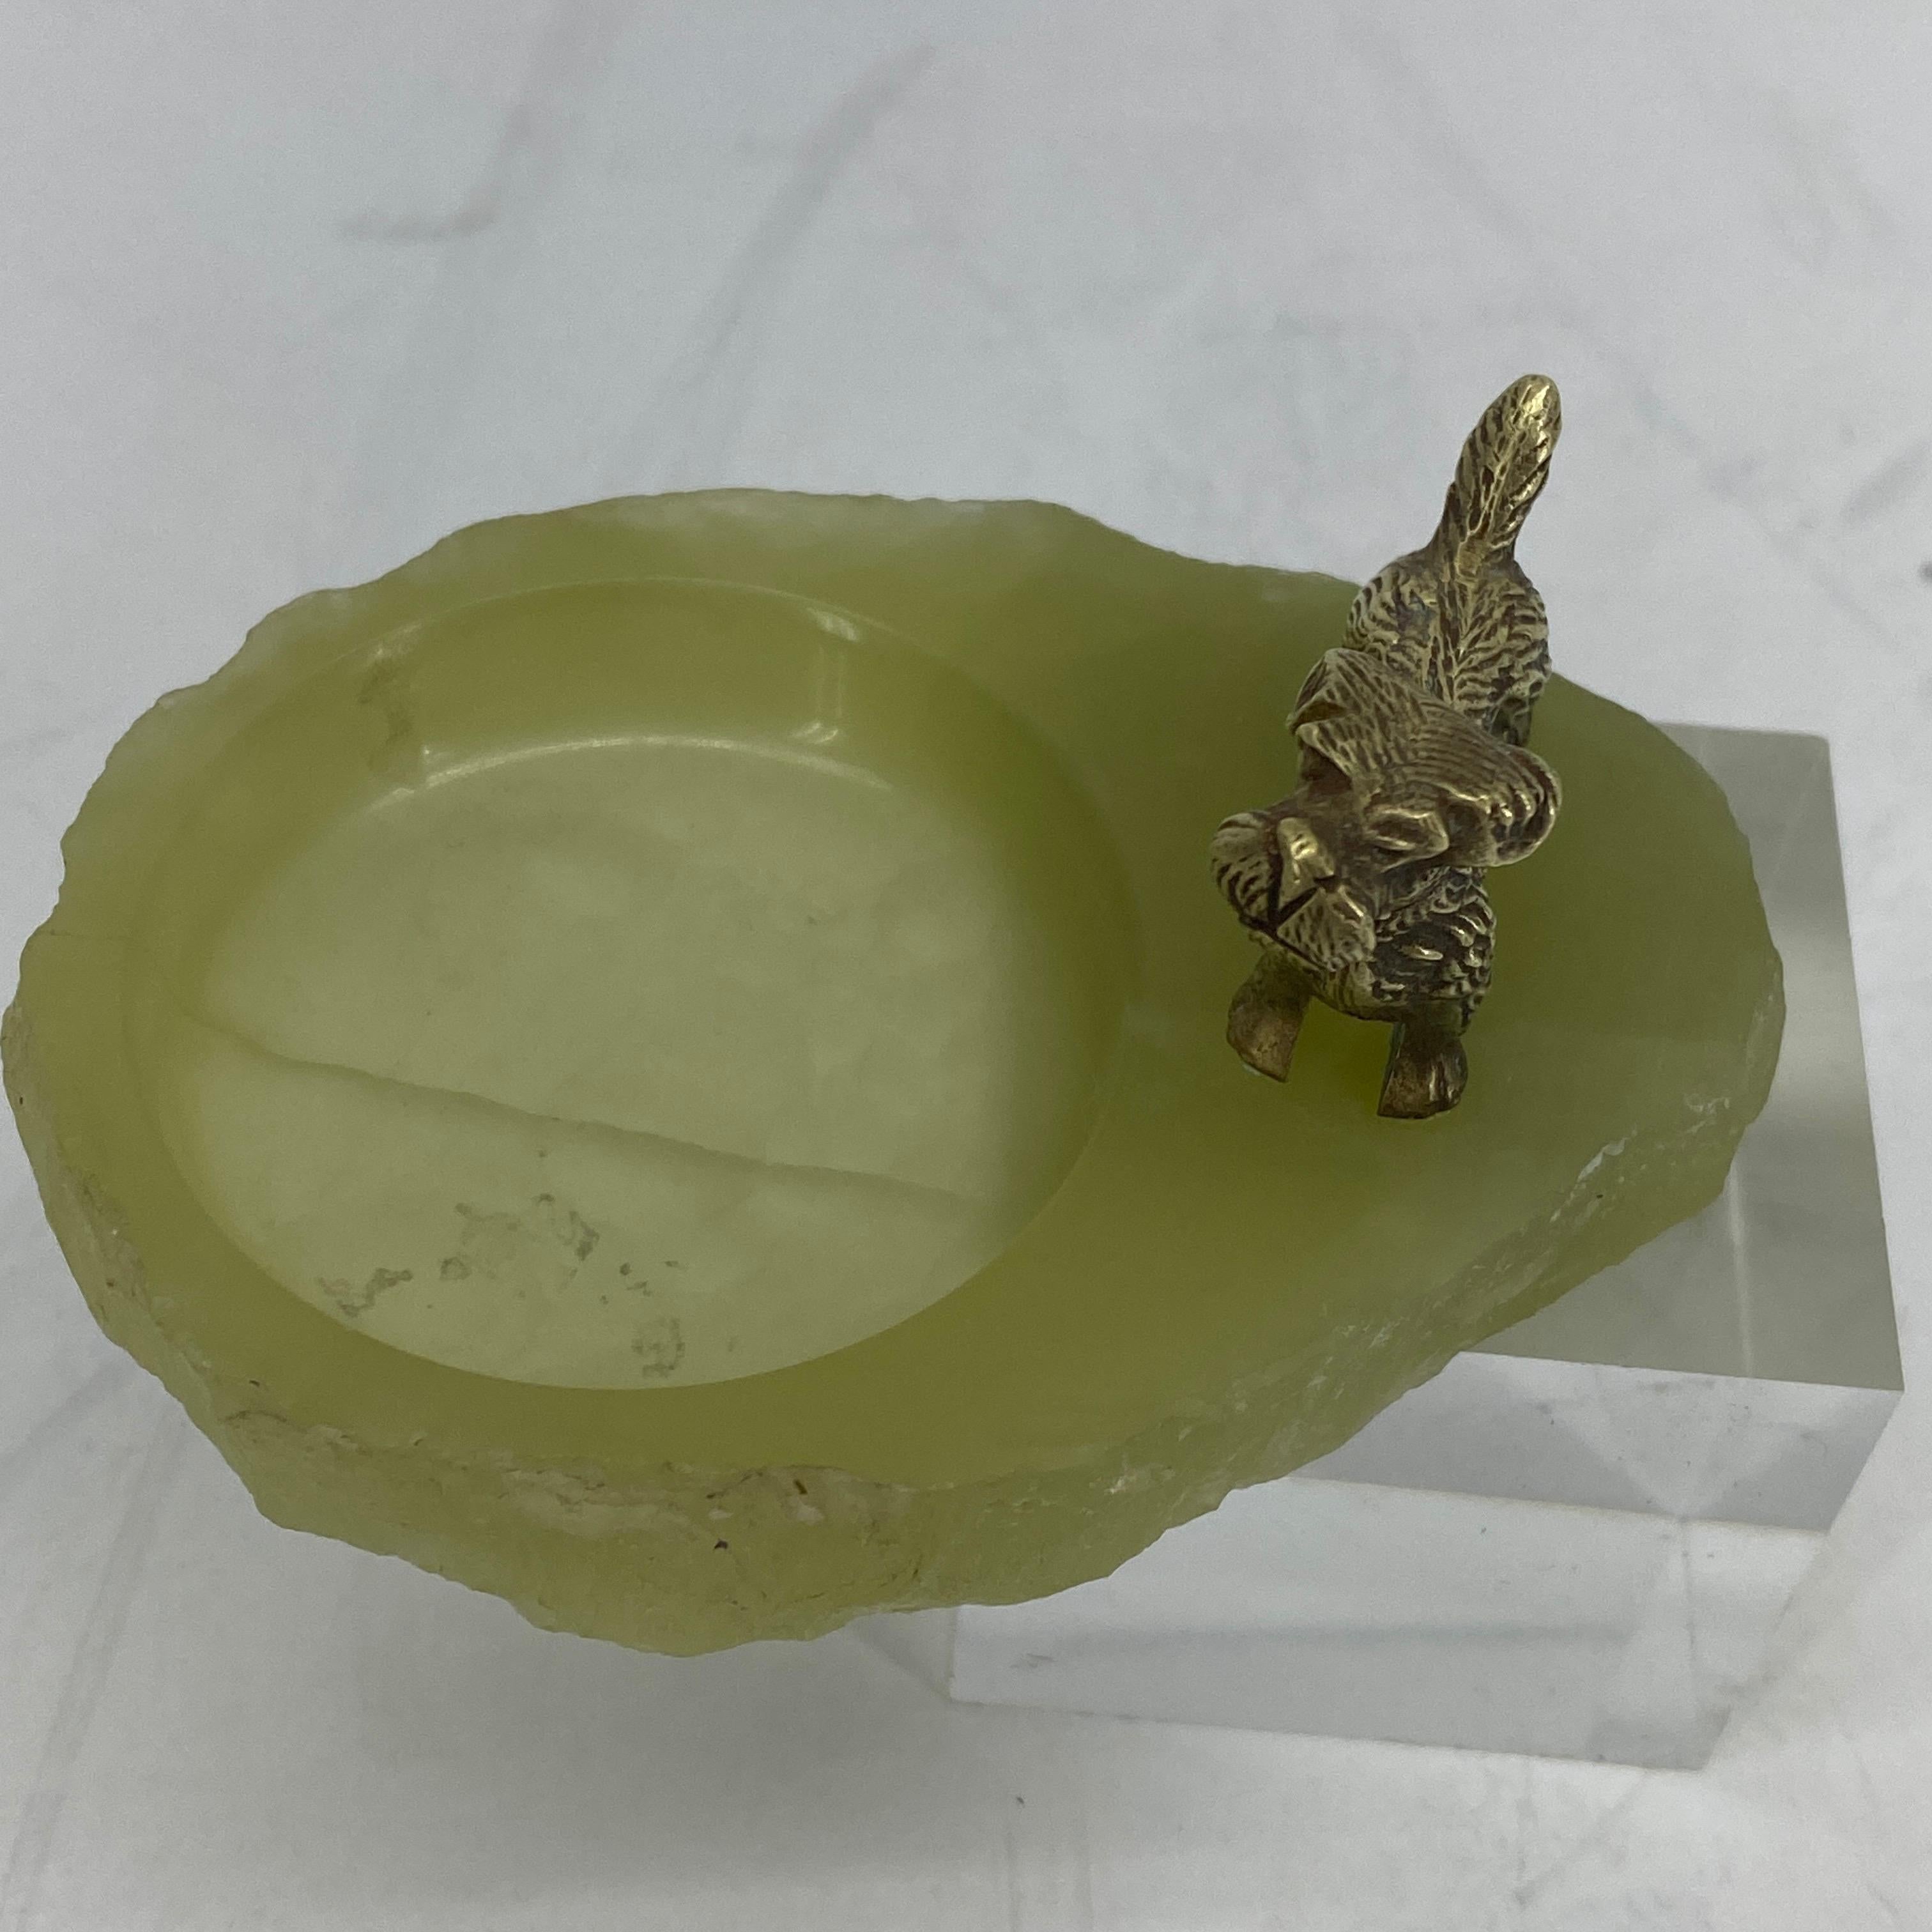 Pistachio Green Onyx and Bronze Terrier Ashtray or Jewelry Tray 2